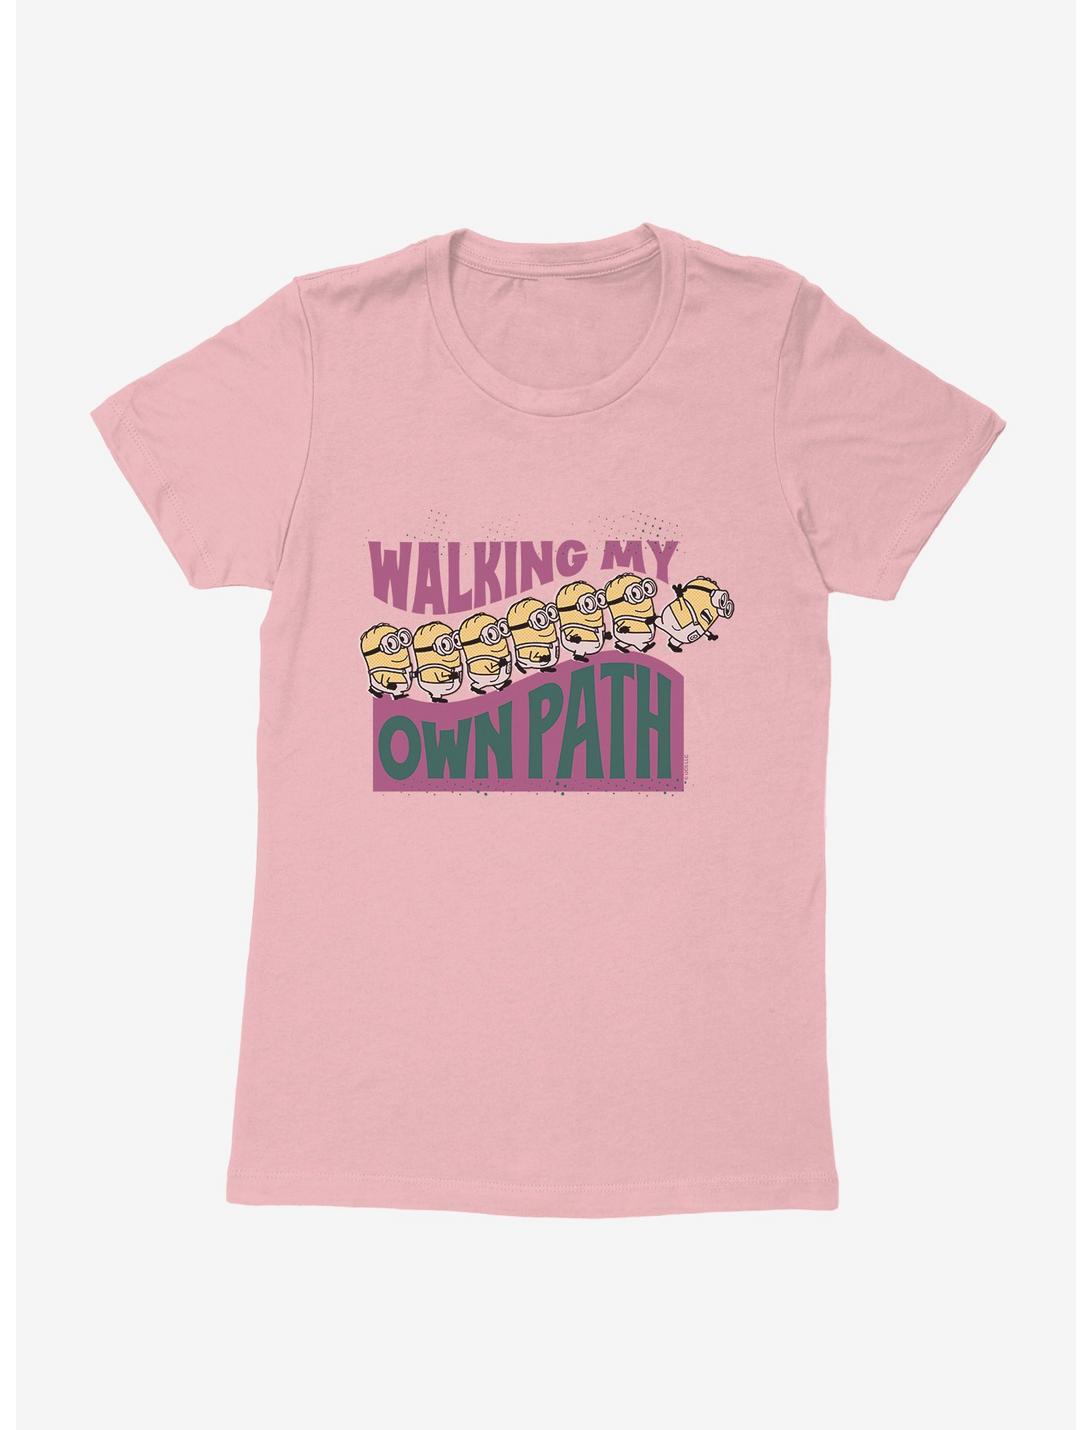 Minions On My Own Path Womens T-Shirt, LIGHT PINK, hi-res